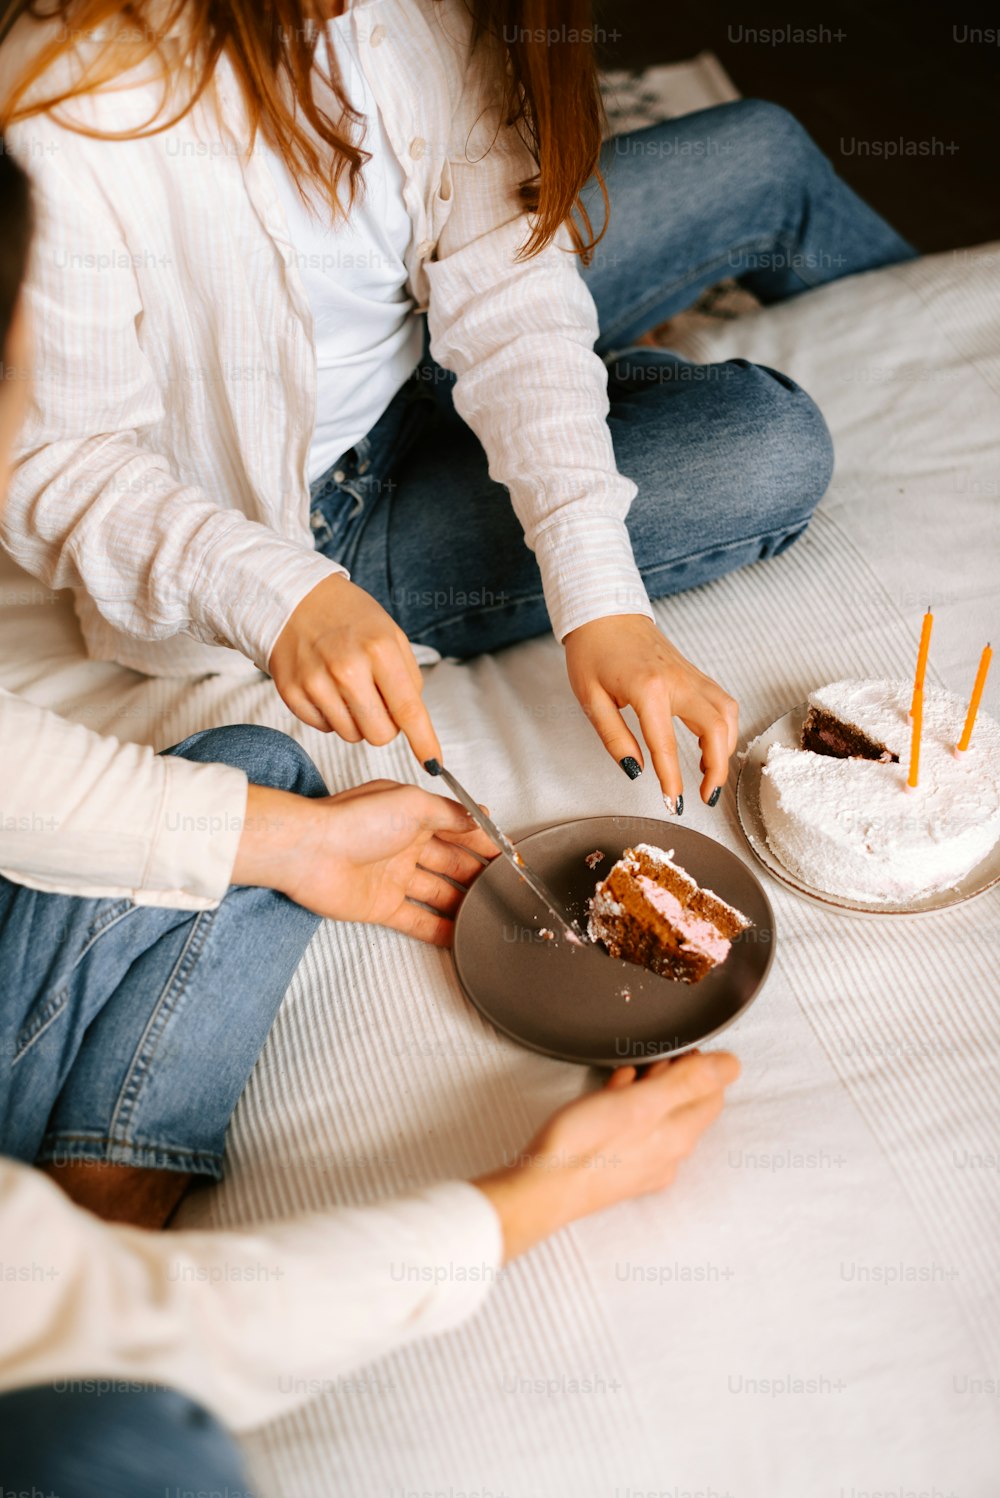 two women sitting on a bed cutting into a cake